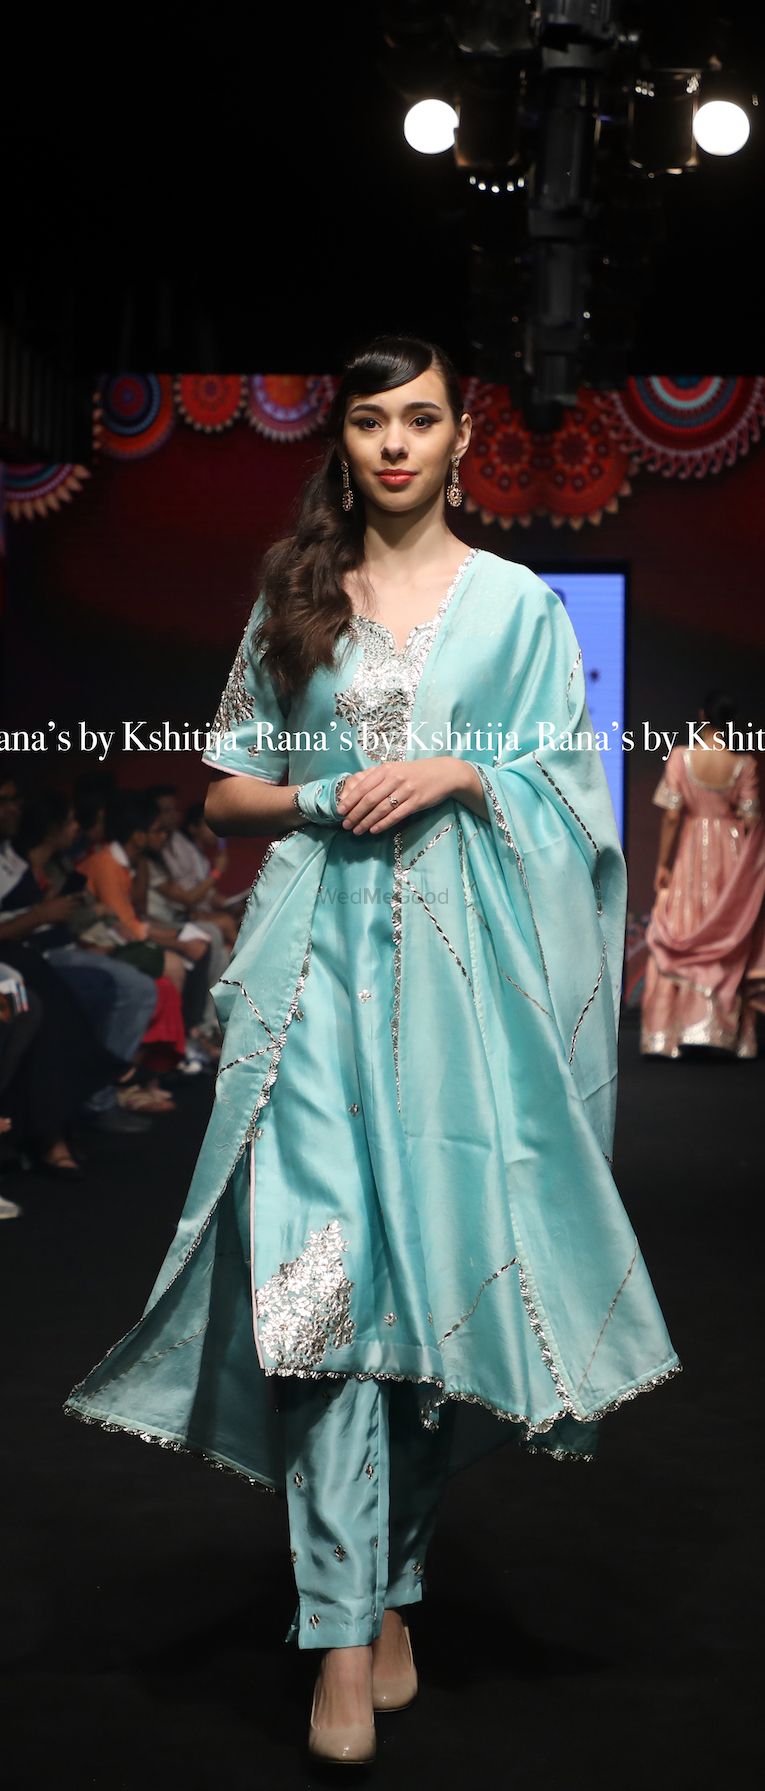 Photo From New Collection launched at India Runway Week, New Delhi  - By RANA'S by Kshitija